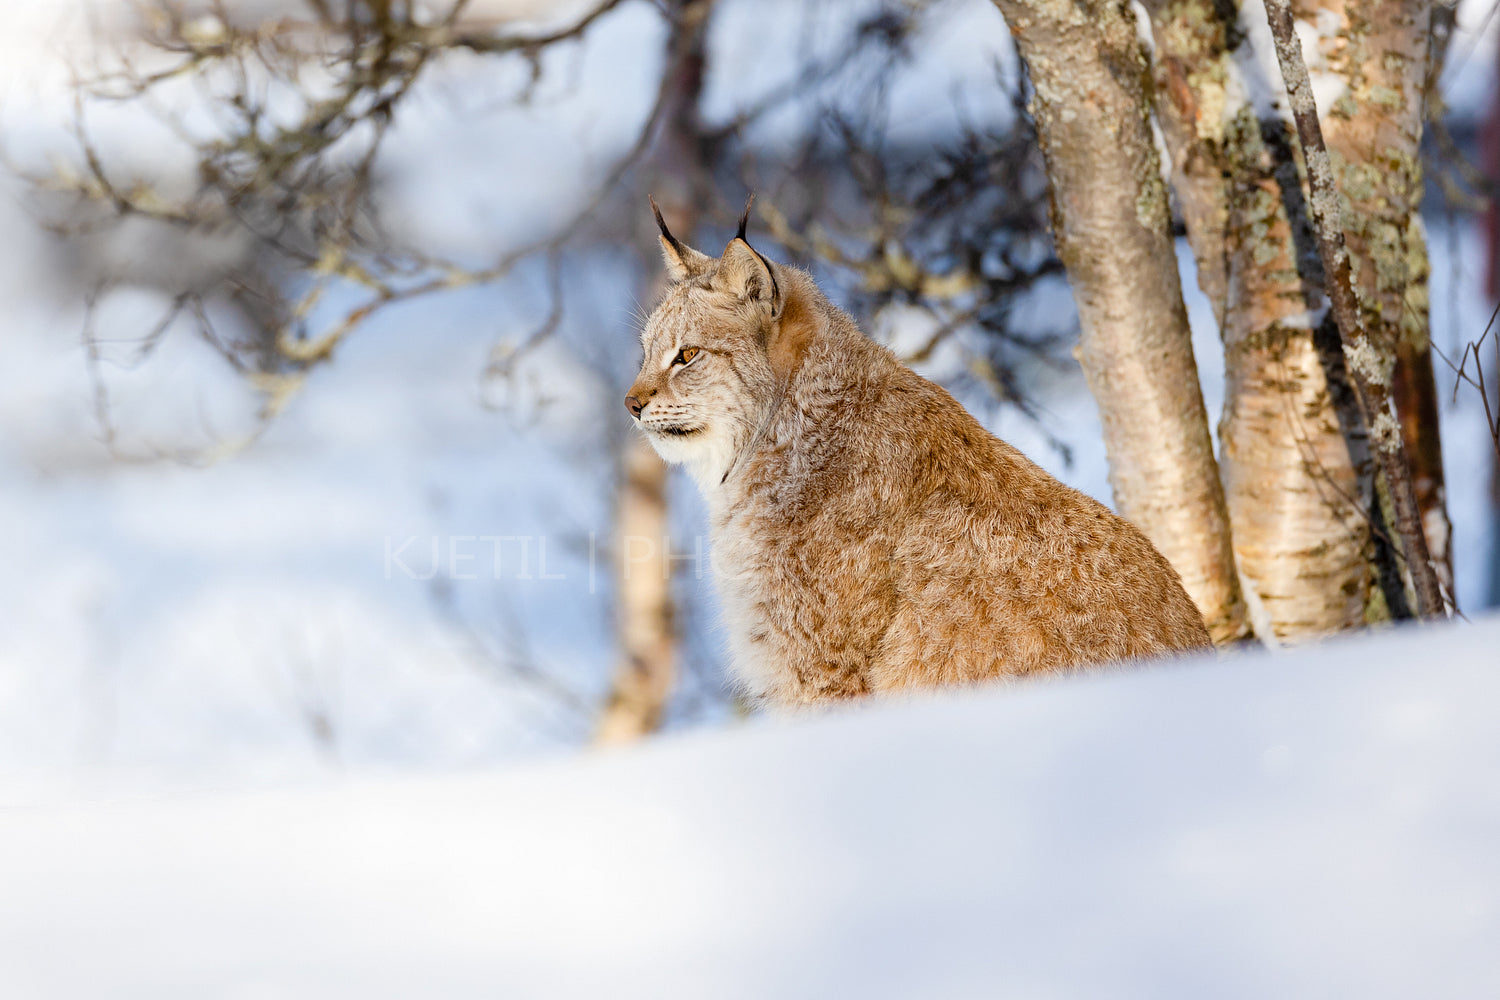 Wild cat sitting on snow by bare trees in nature